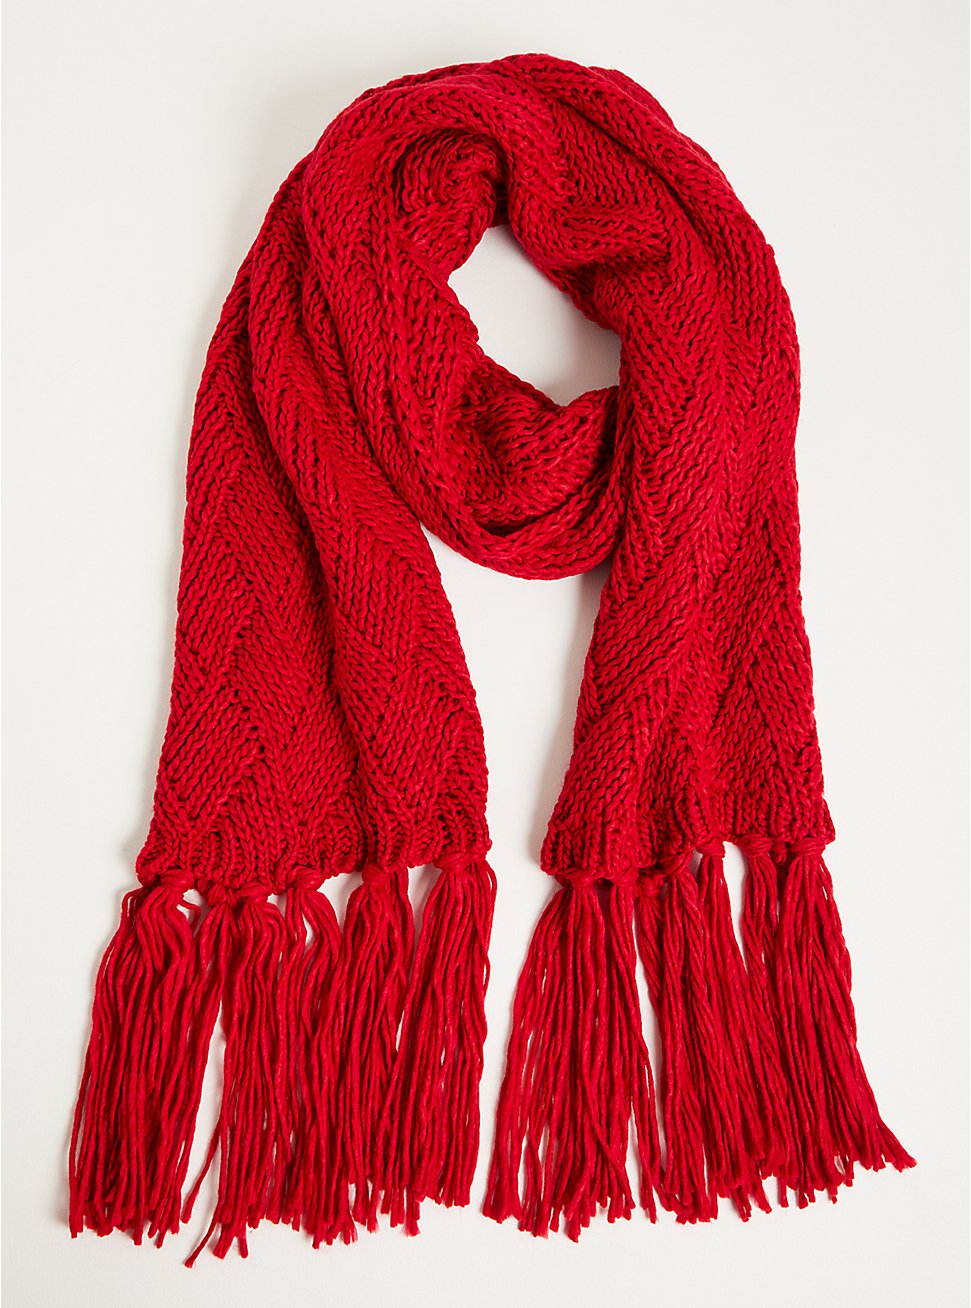 Woven Basketweave Scarf, RED, hi-res